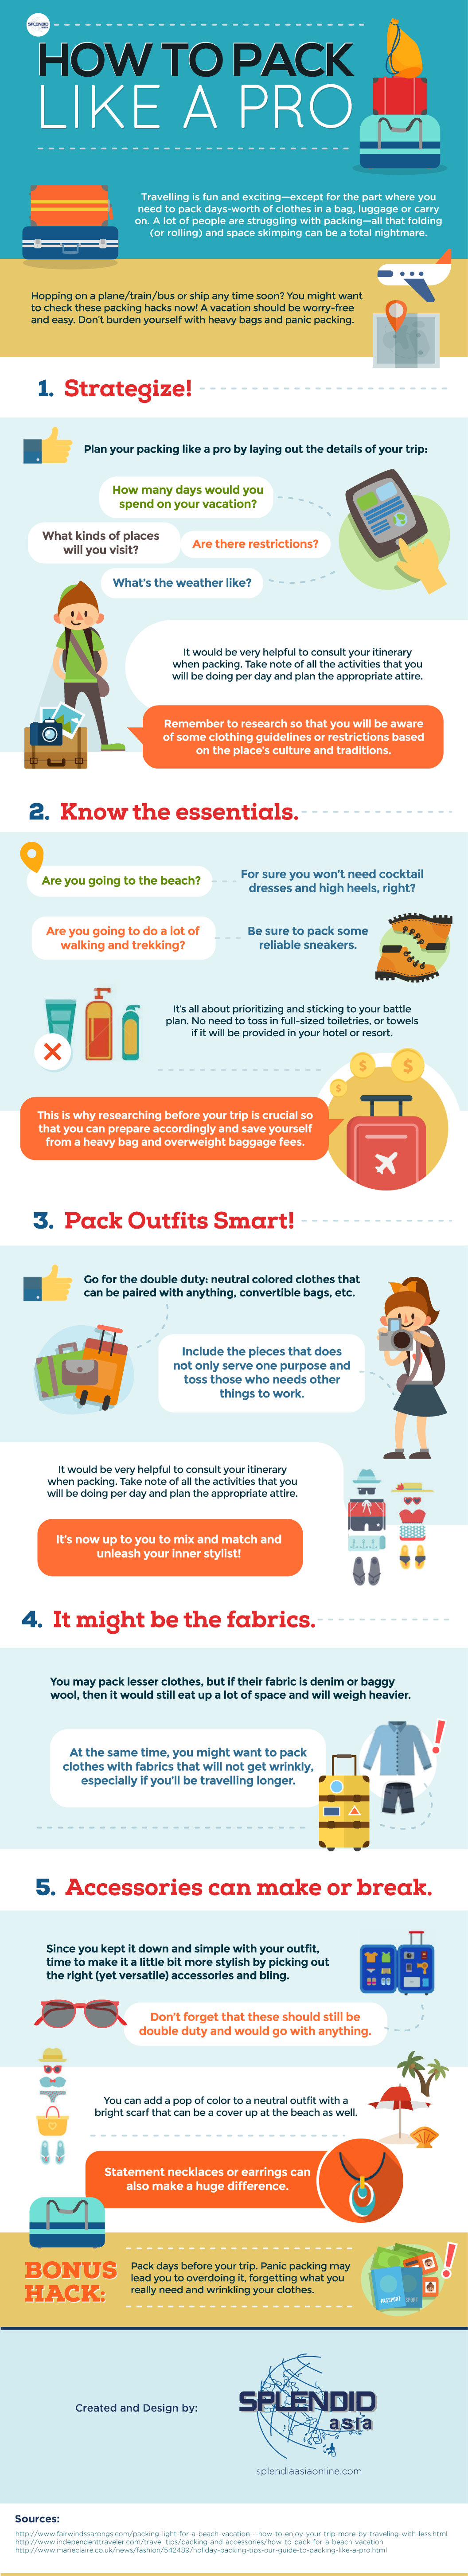 How to Pack light like a Pro